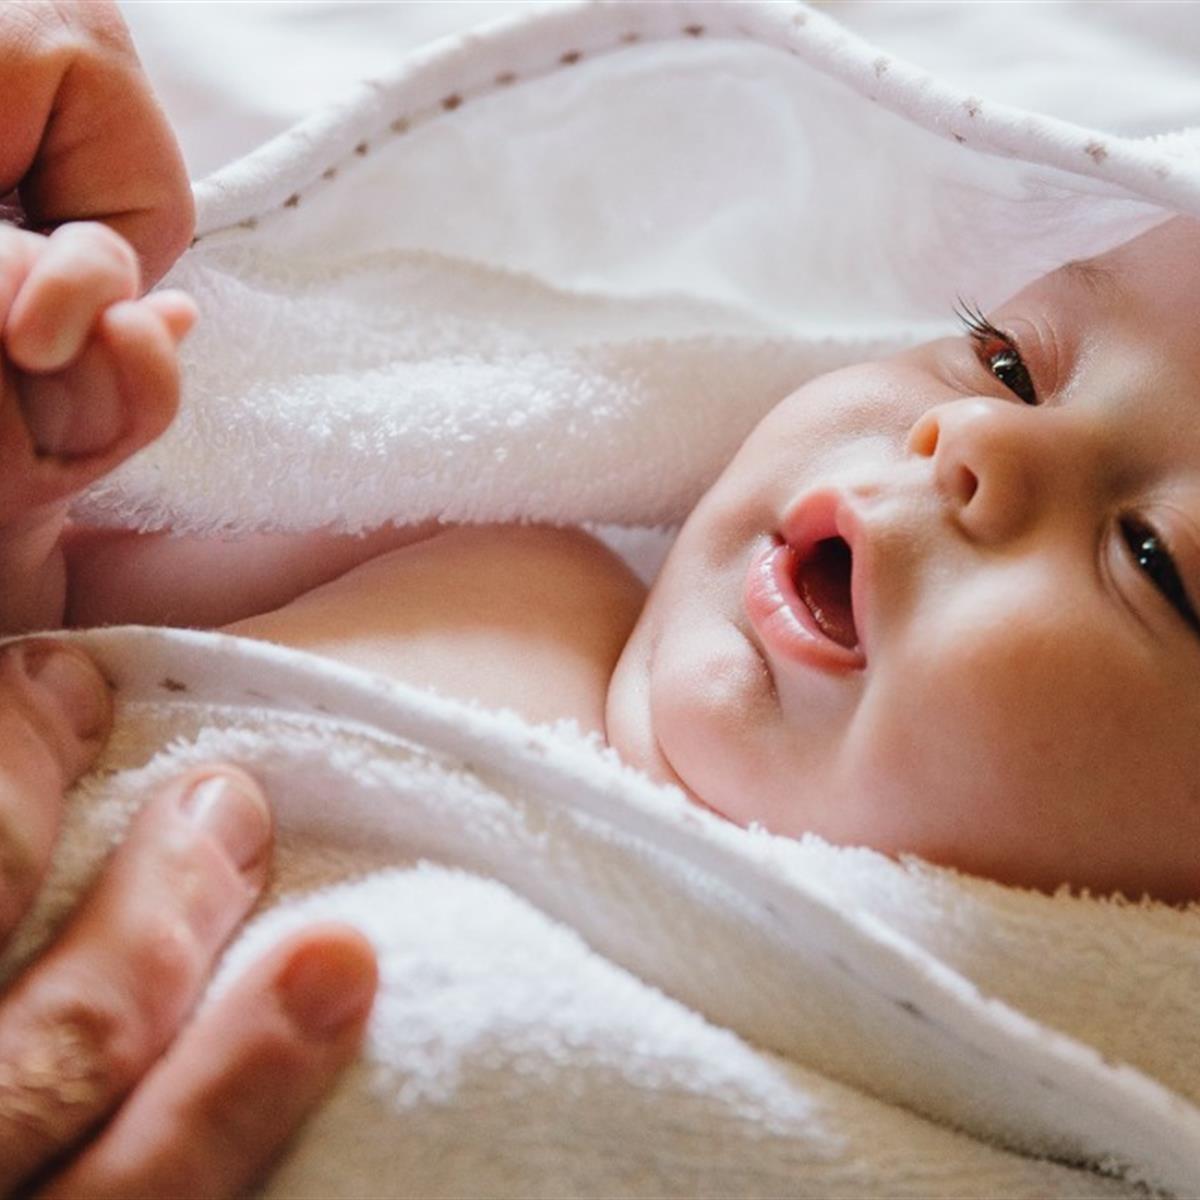 Bathing Your Baby - HealthyChildren.org